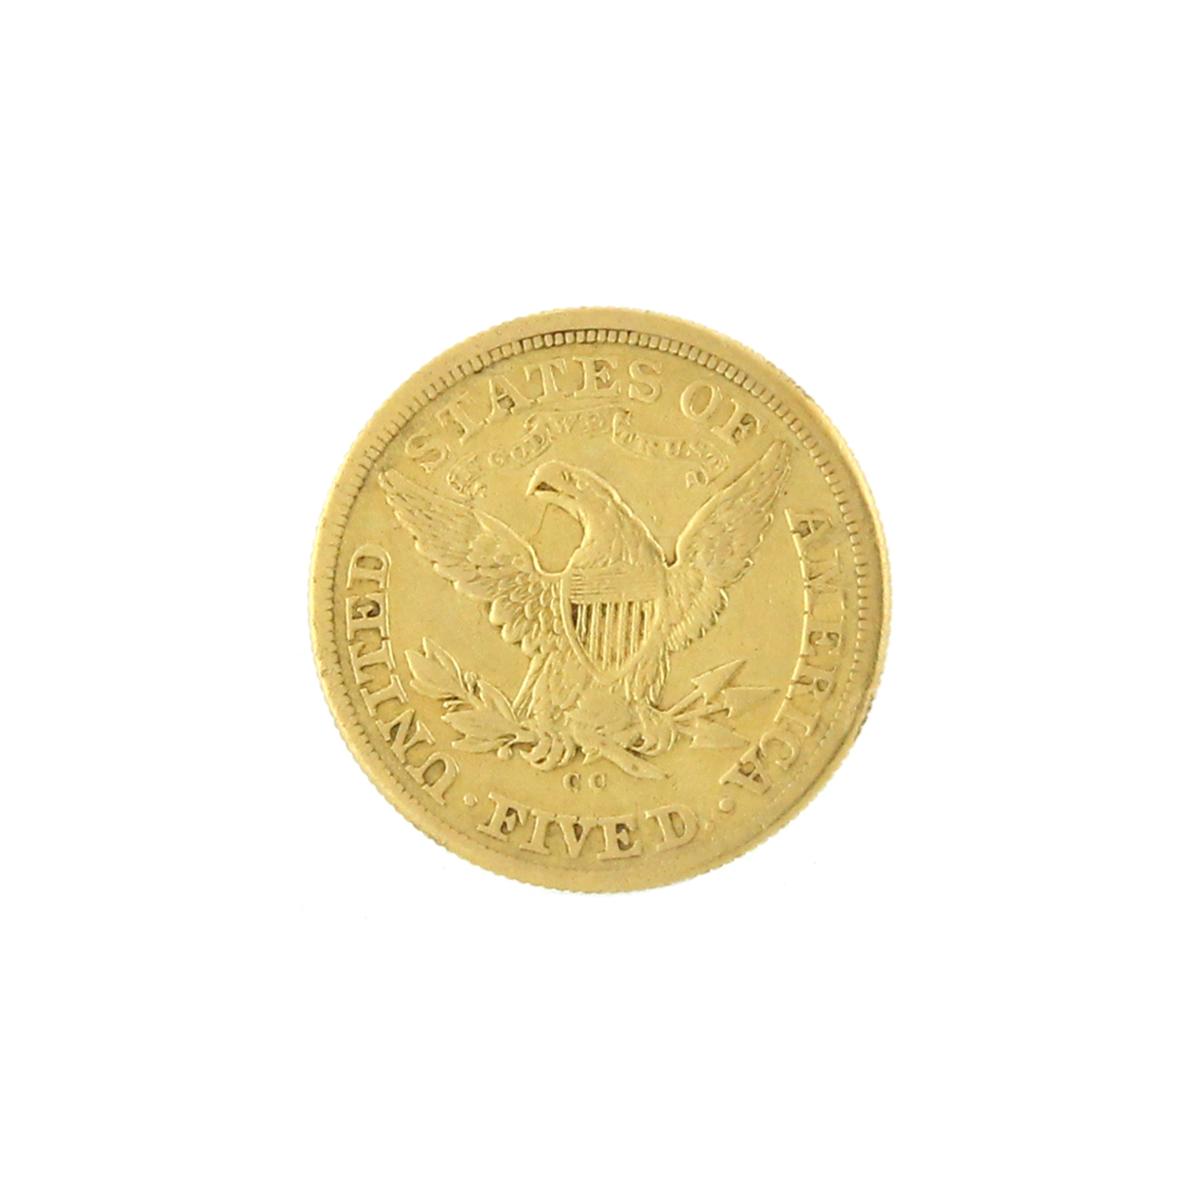 *Extremely Rare 1874-CC $5 U.S. Liberty Head Gold Coin (DF)